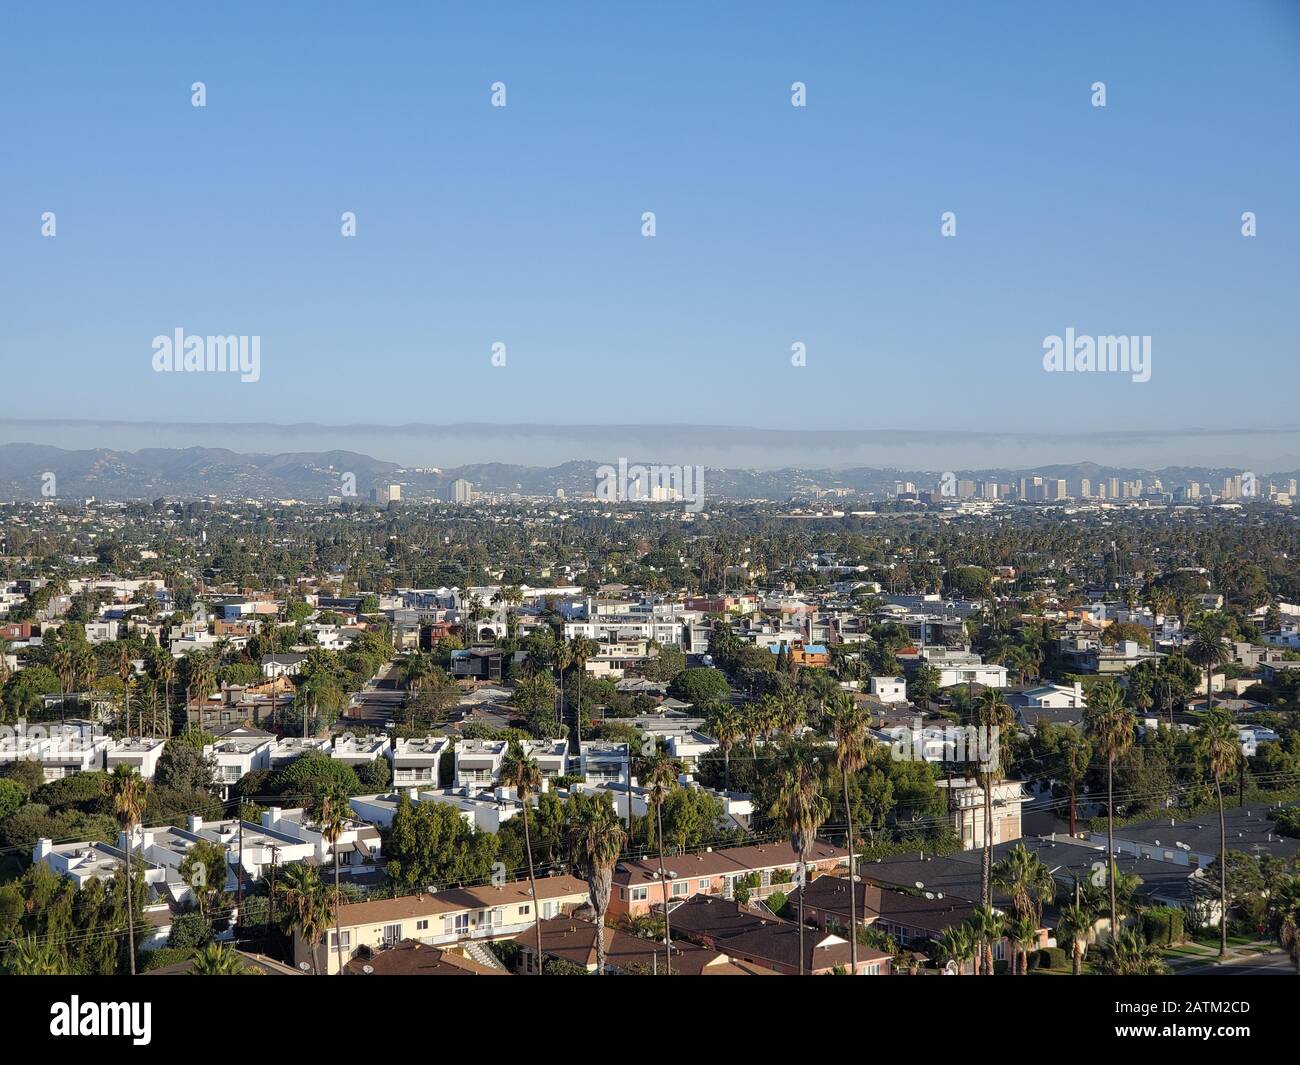 Aerial view of urban skyline of Los Angeles, California, October 29, 2019. () Stock Photo